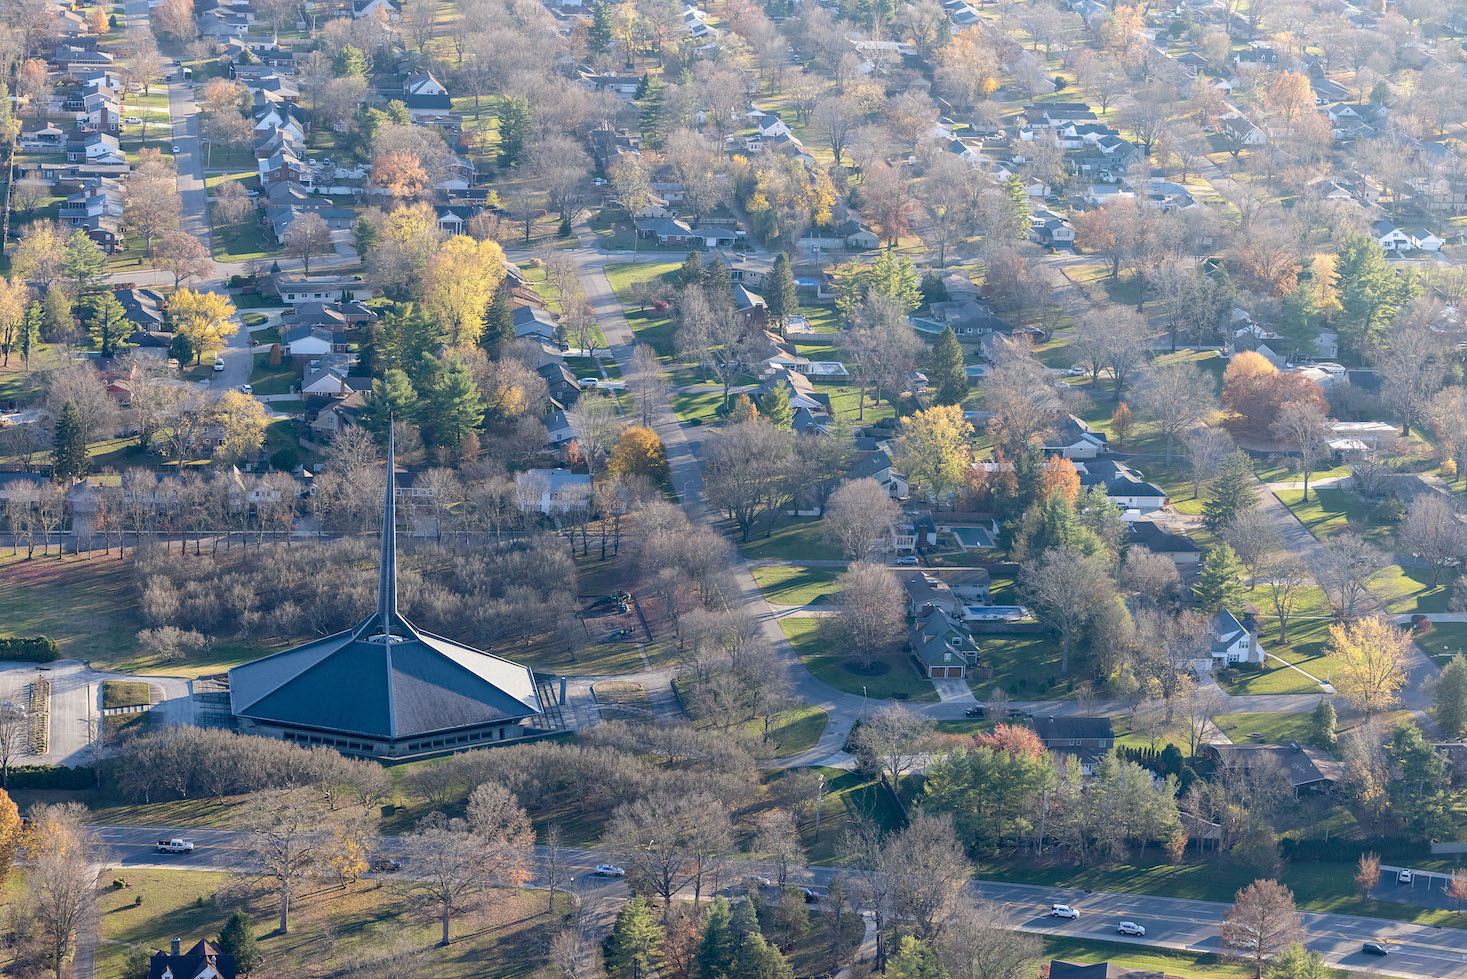 Aerial view of the pointed structure that is North Christian Church in Columbus, Indiana